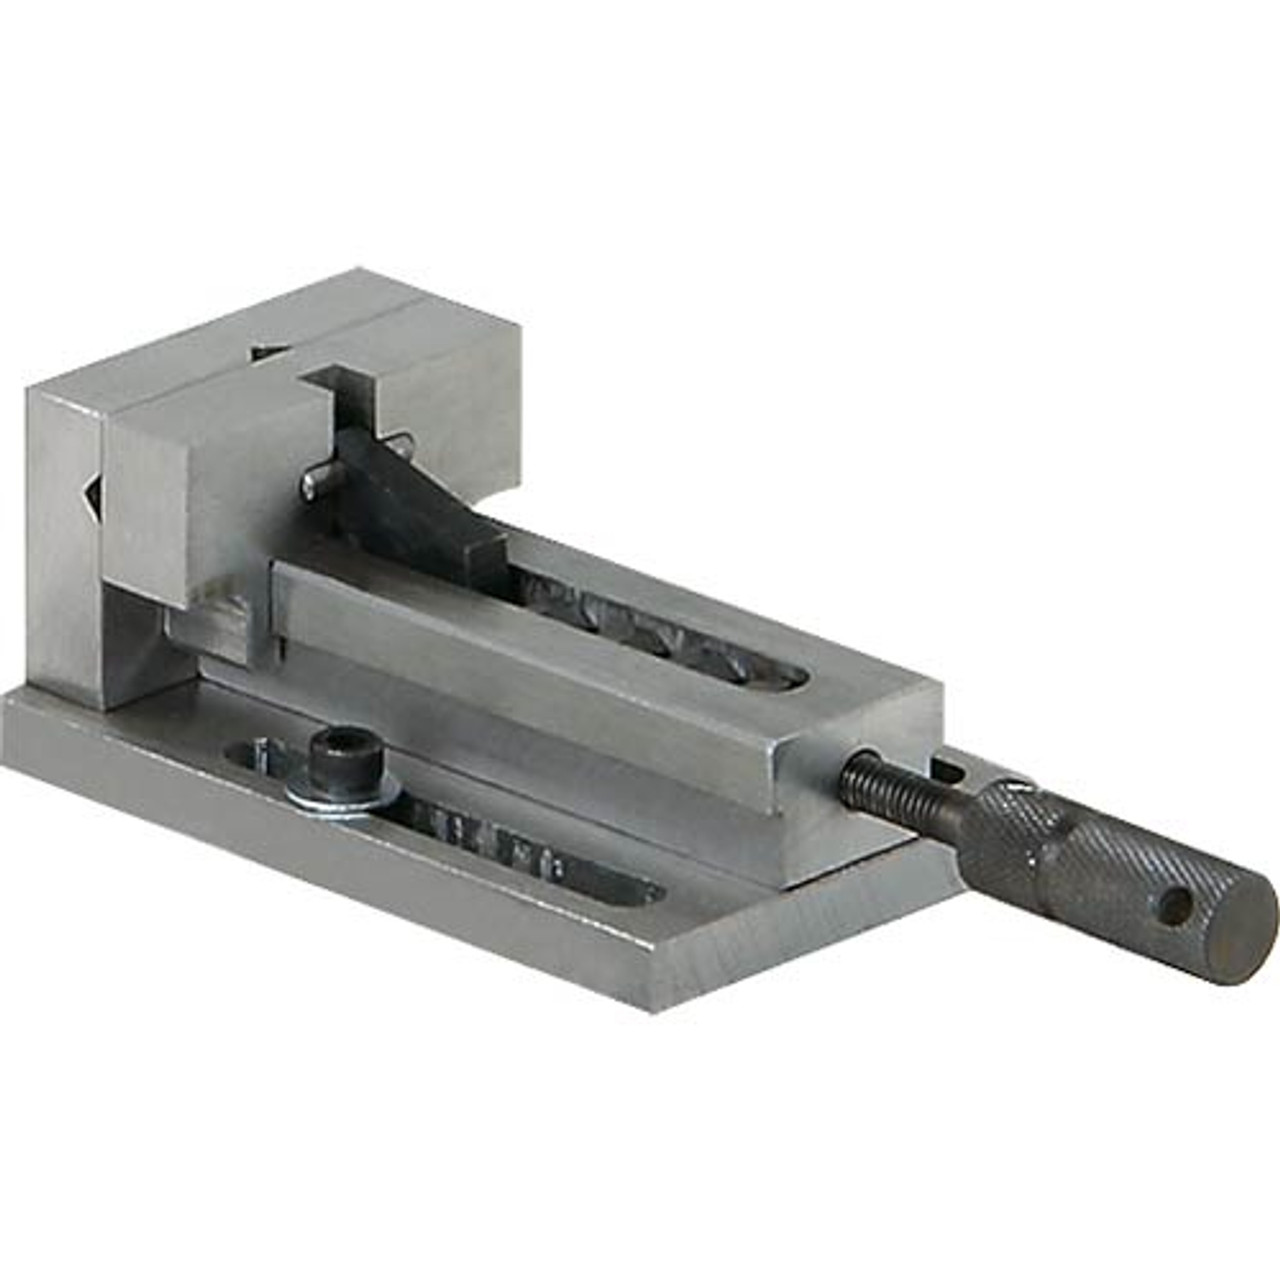 Woodstock Steelex Quick Vise for M1036 Mill M1038